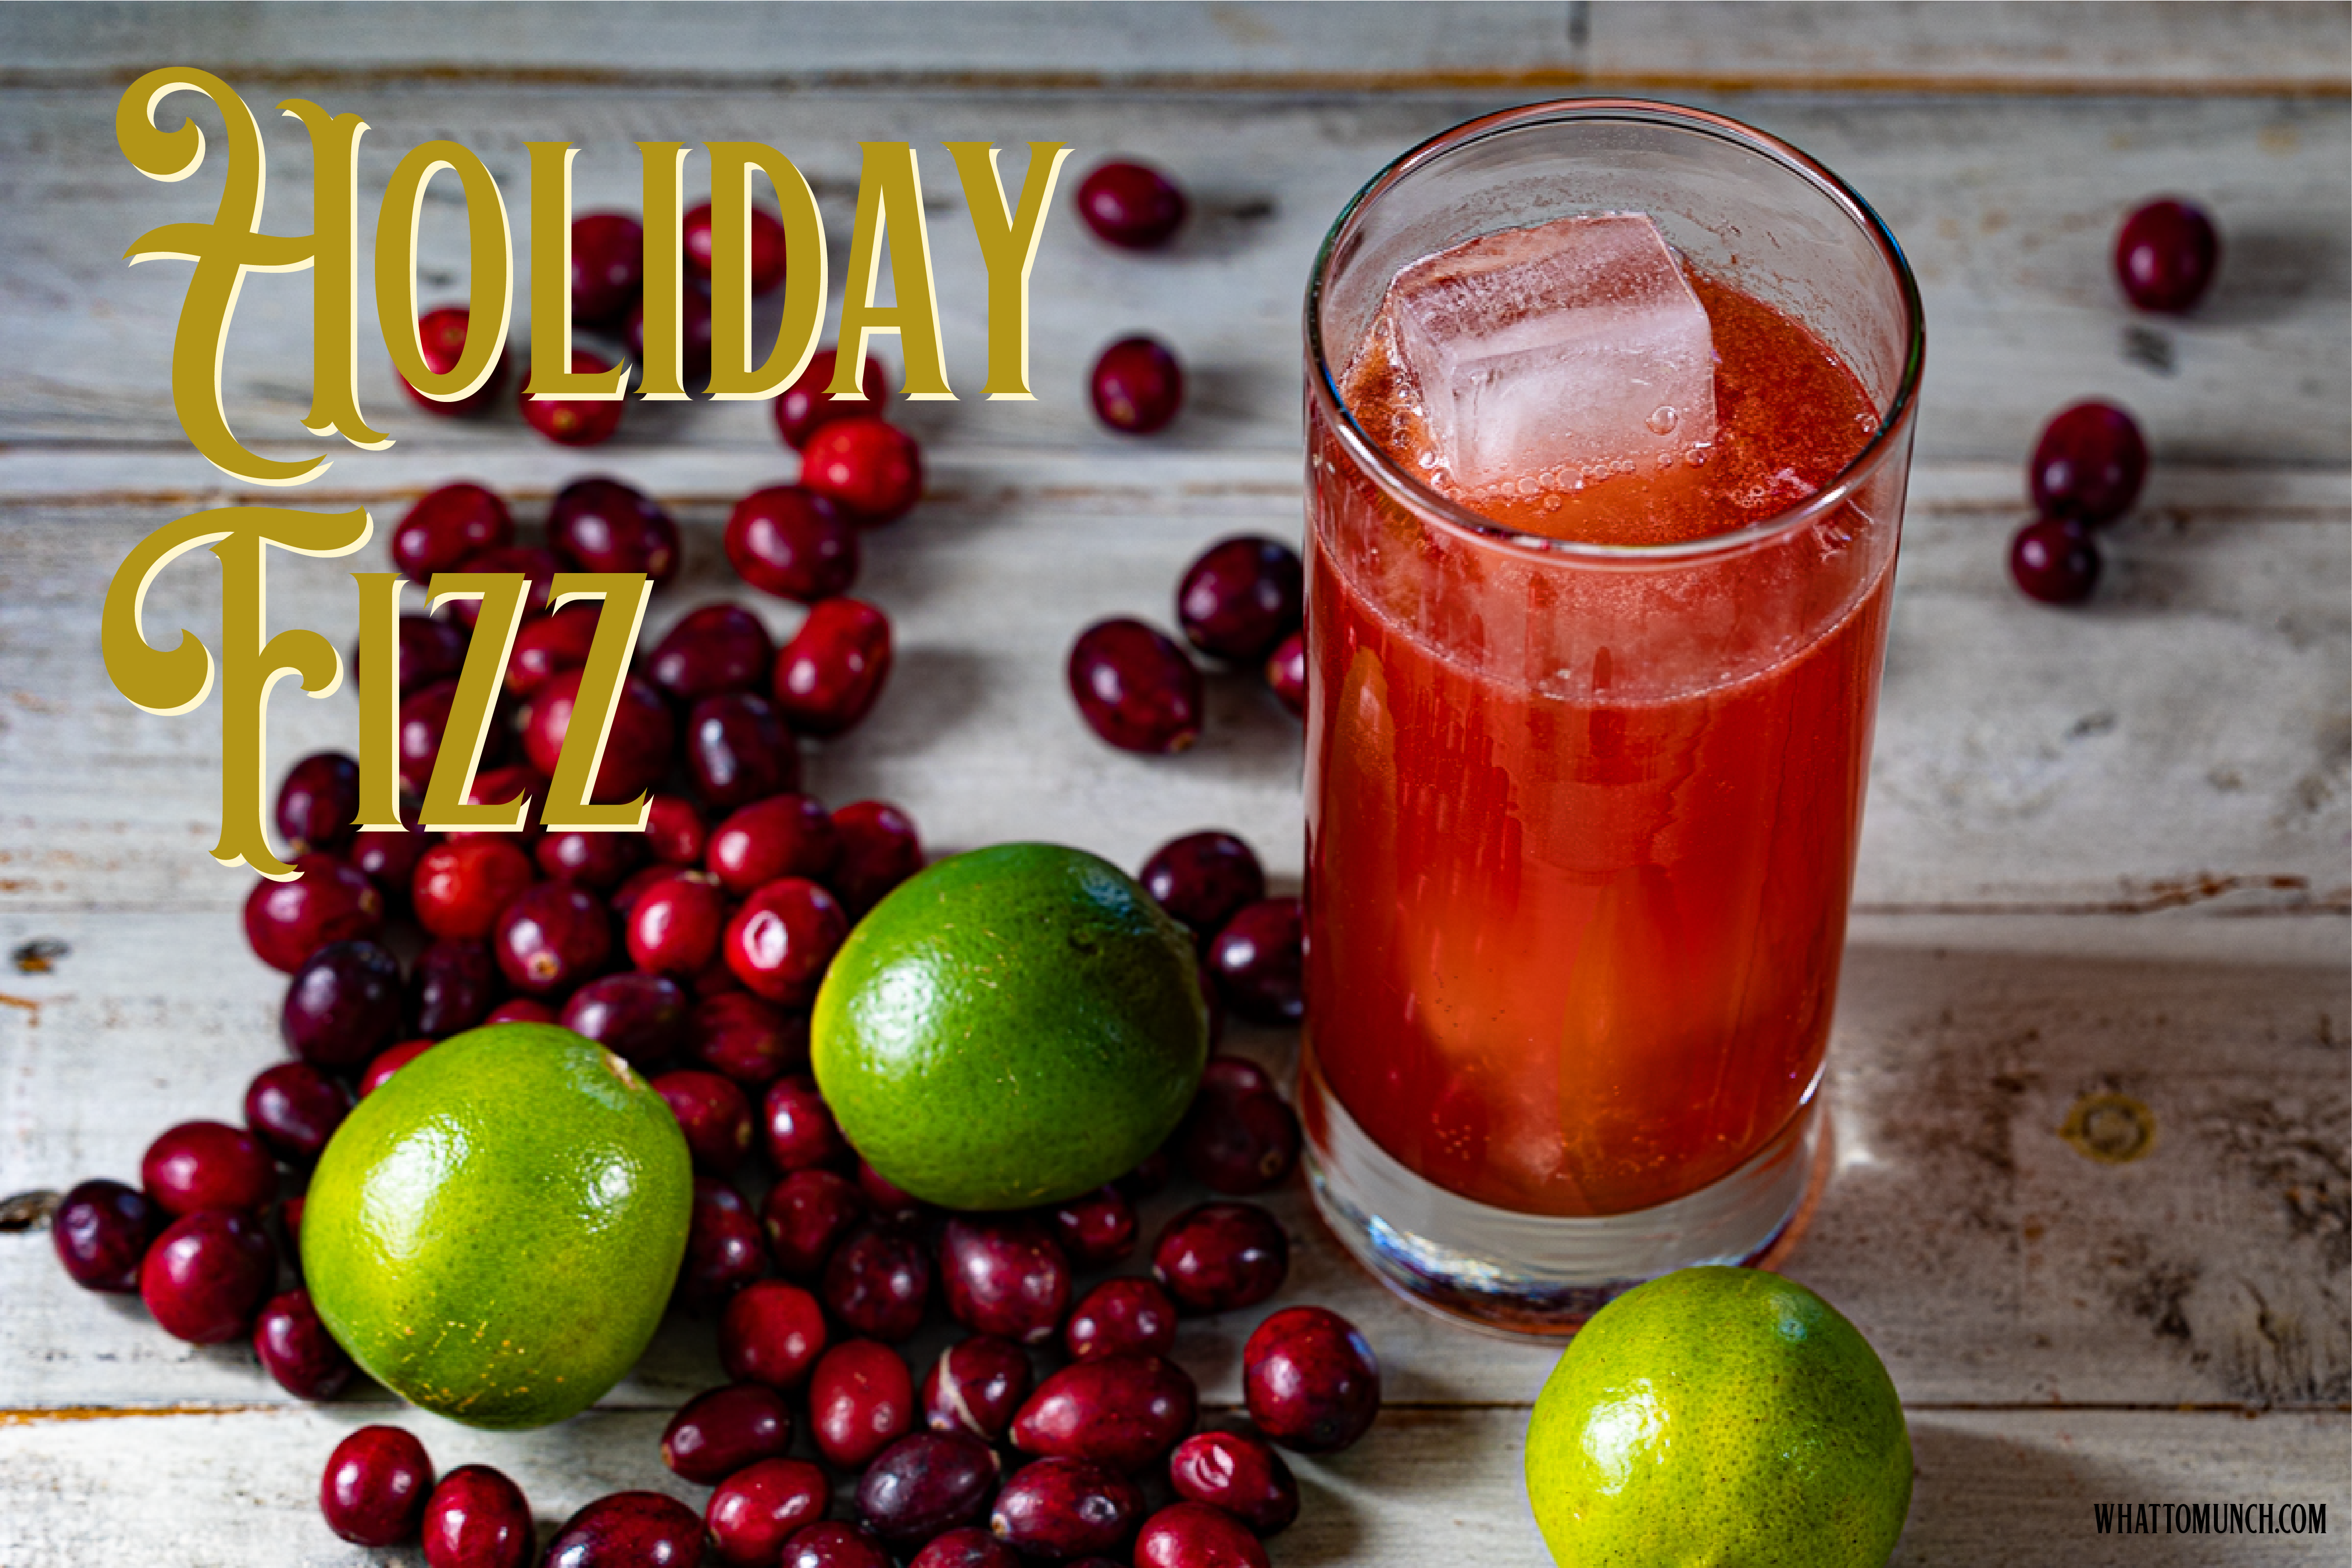 The Holiday Fizz